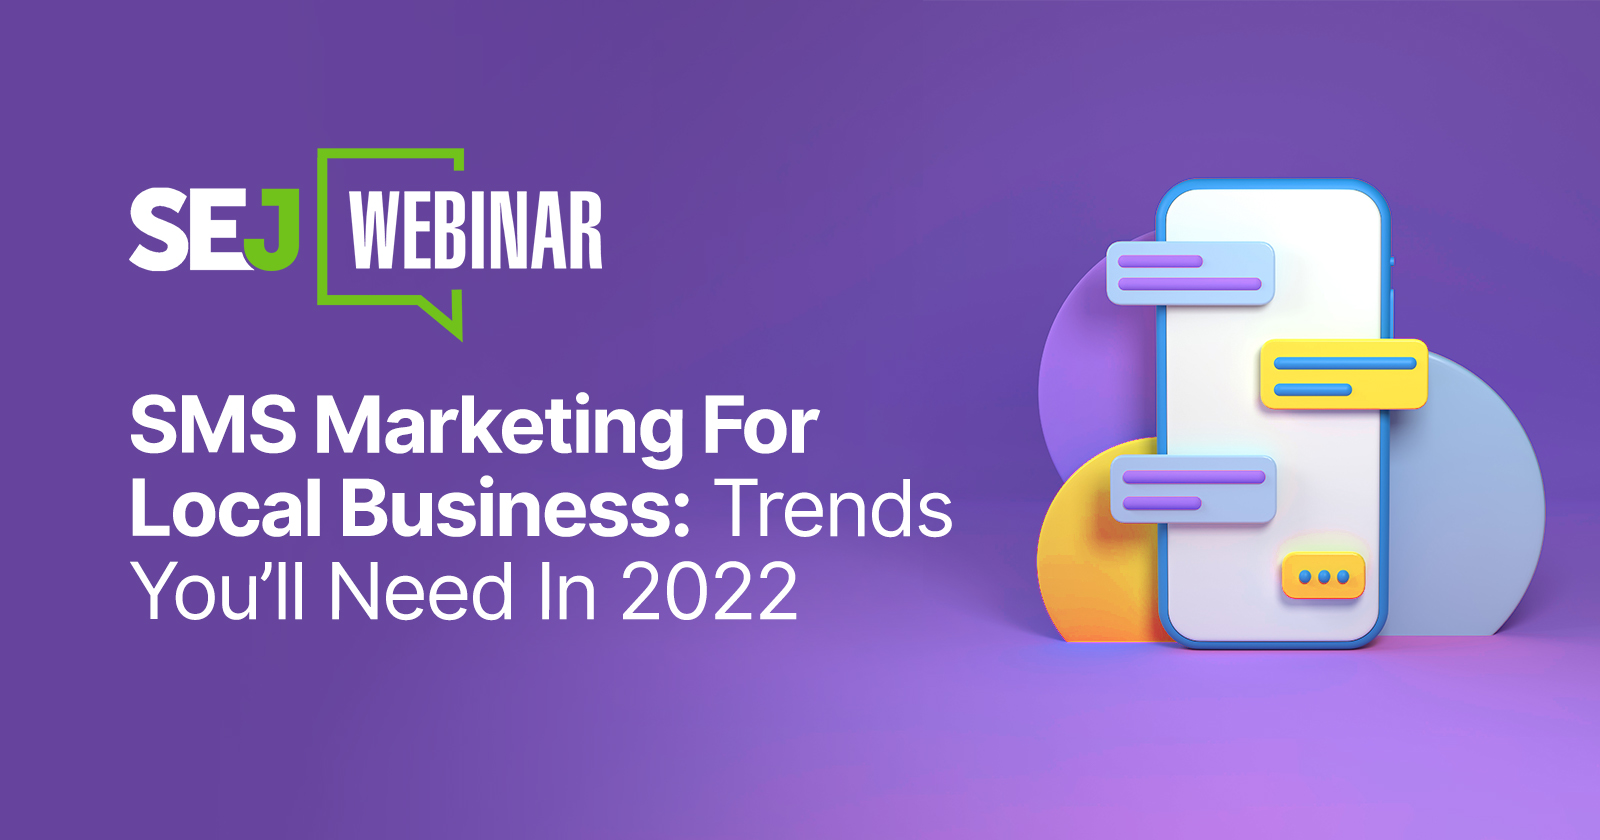 SMS Marketing For Local Business: Trends You’ll Need In 2022 [Webinar] via @sejournal, @hethr_campbell